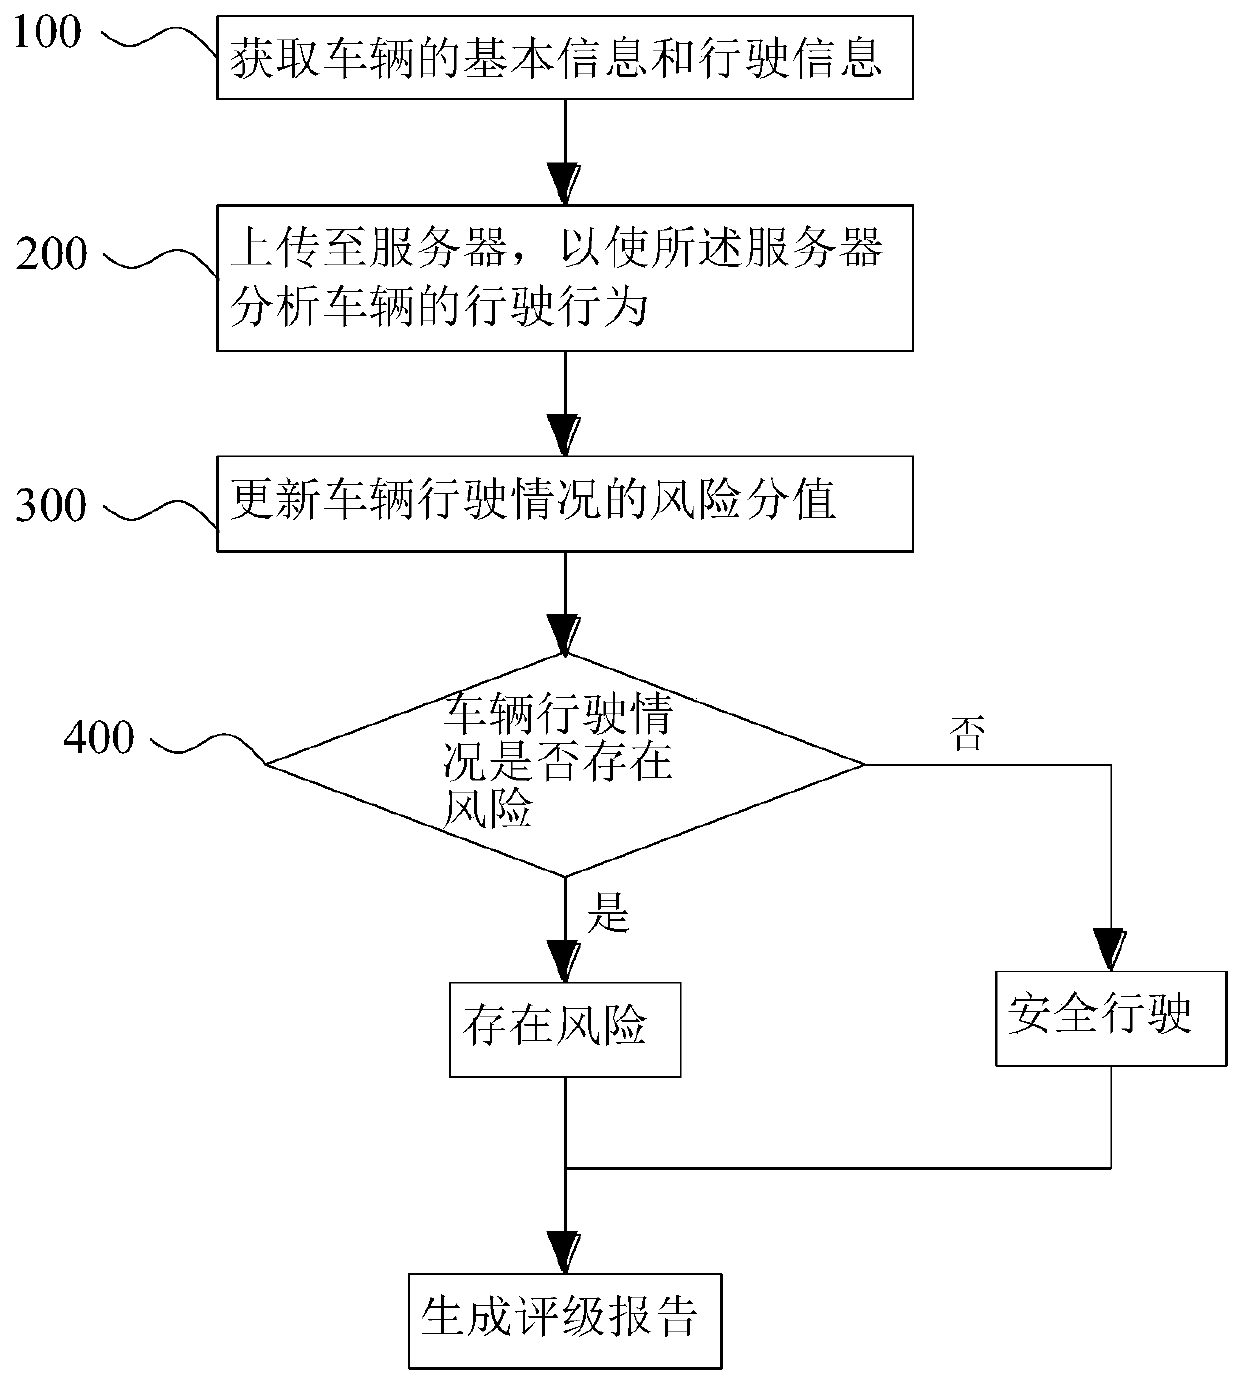 Vehicle driving condition risk analysis method and system based on Beidou positioning system